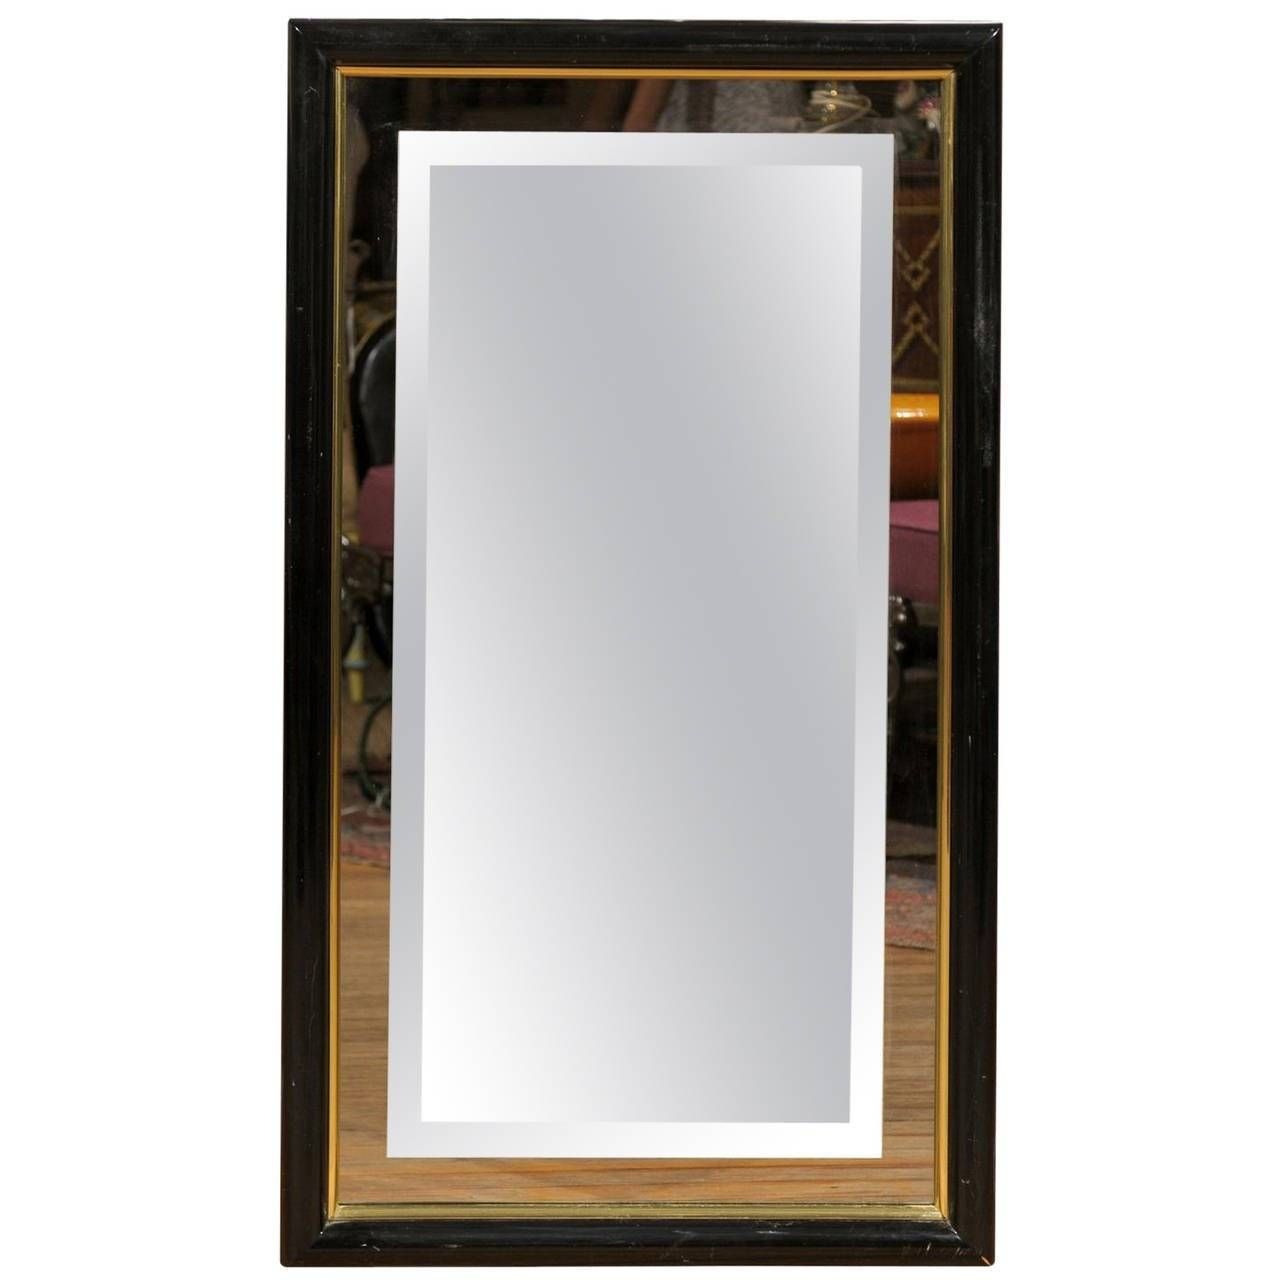 Smoked And Beveled Glass Wall Mirror In A Black And Brass Frame Regarding Large Glass Bevelled Wall Mirrors (View 18 of 25)